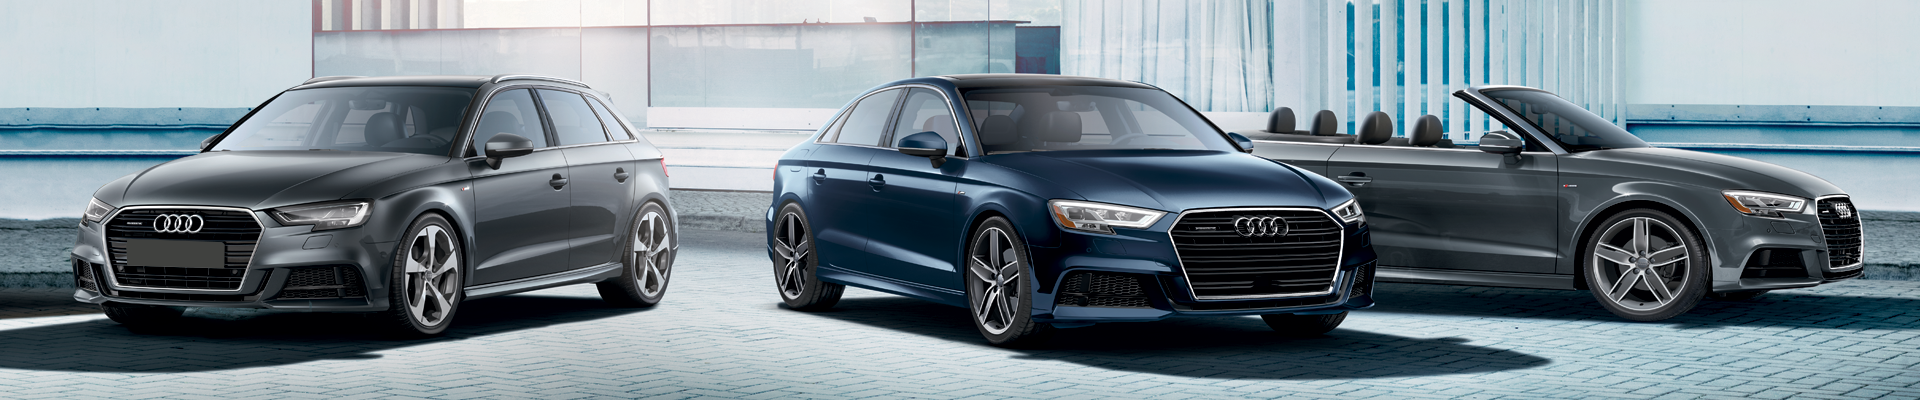 2018-Audi-A3-Family-1940x400 (1).png